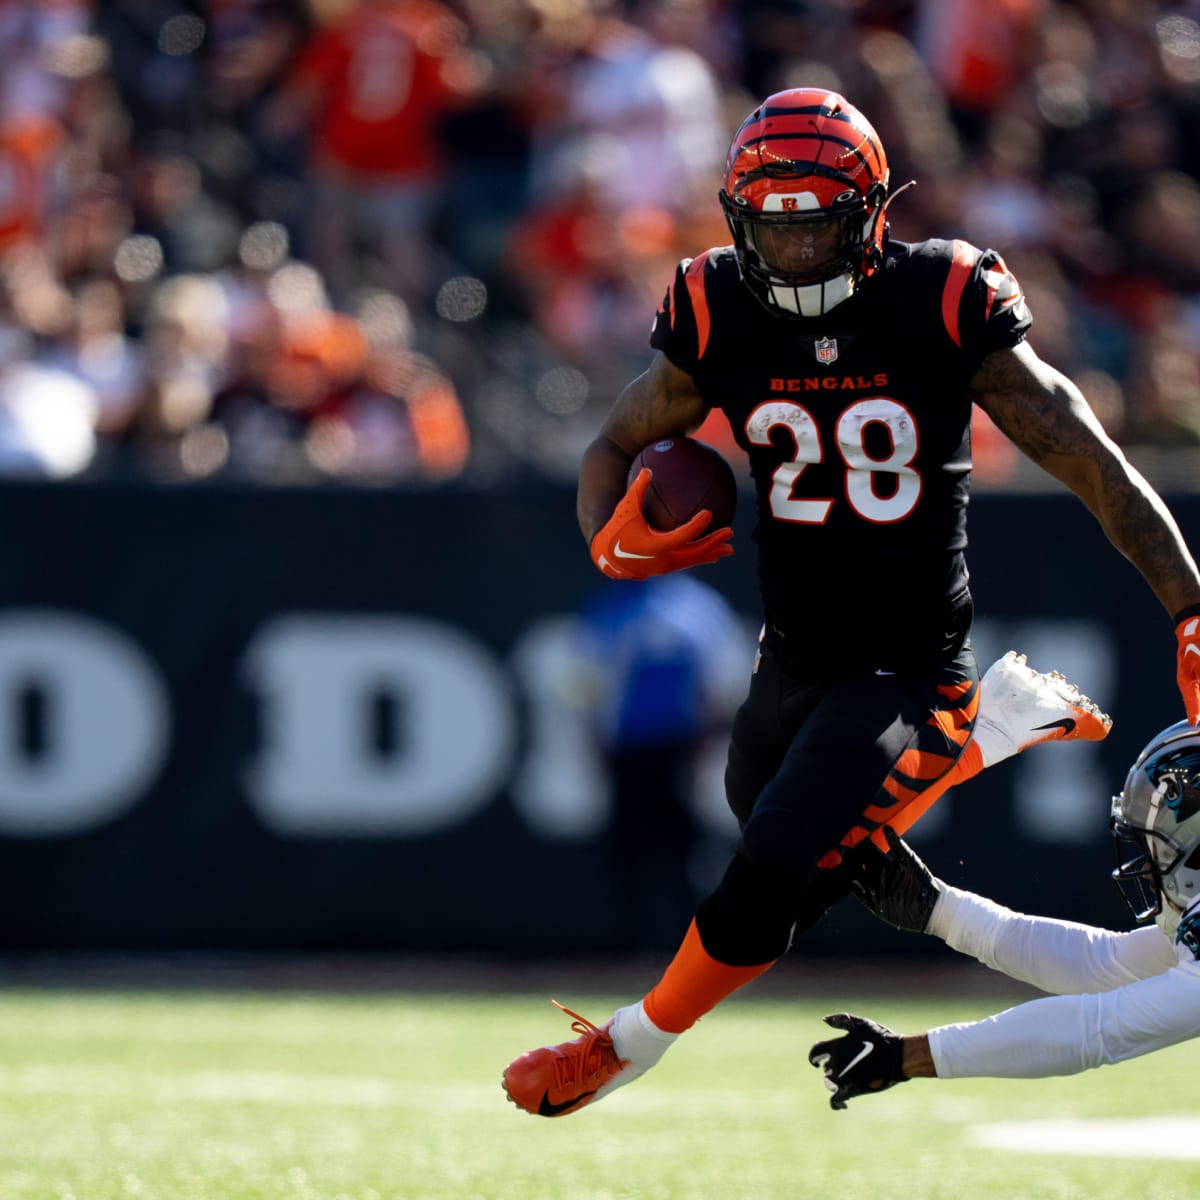 Joe Mixon Agrees to Significant Salary Reduction to Stay with the Bengals